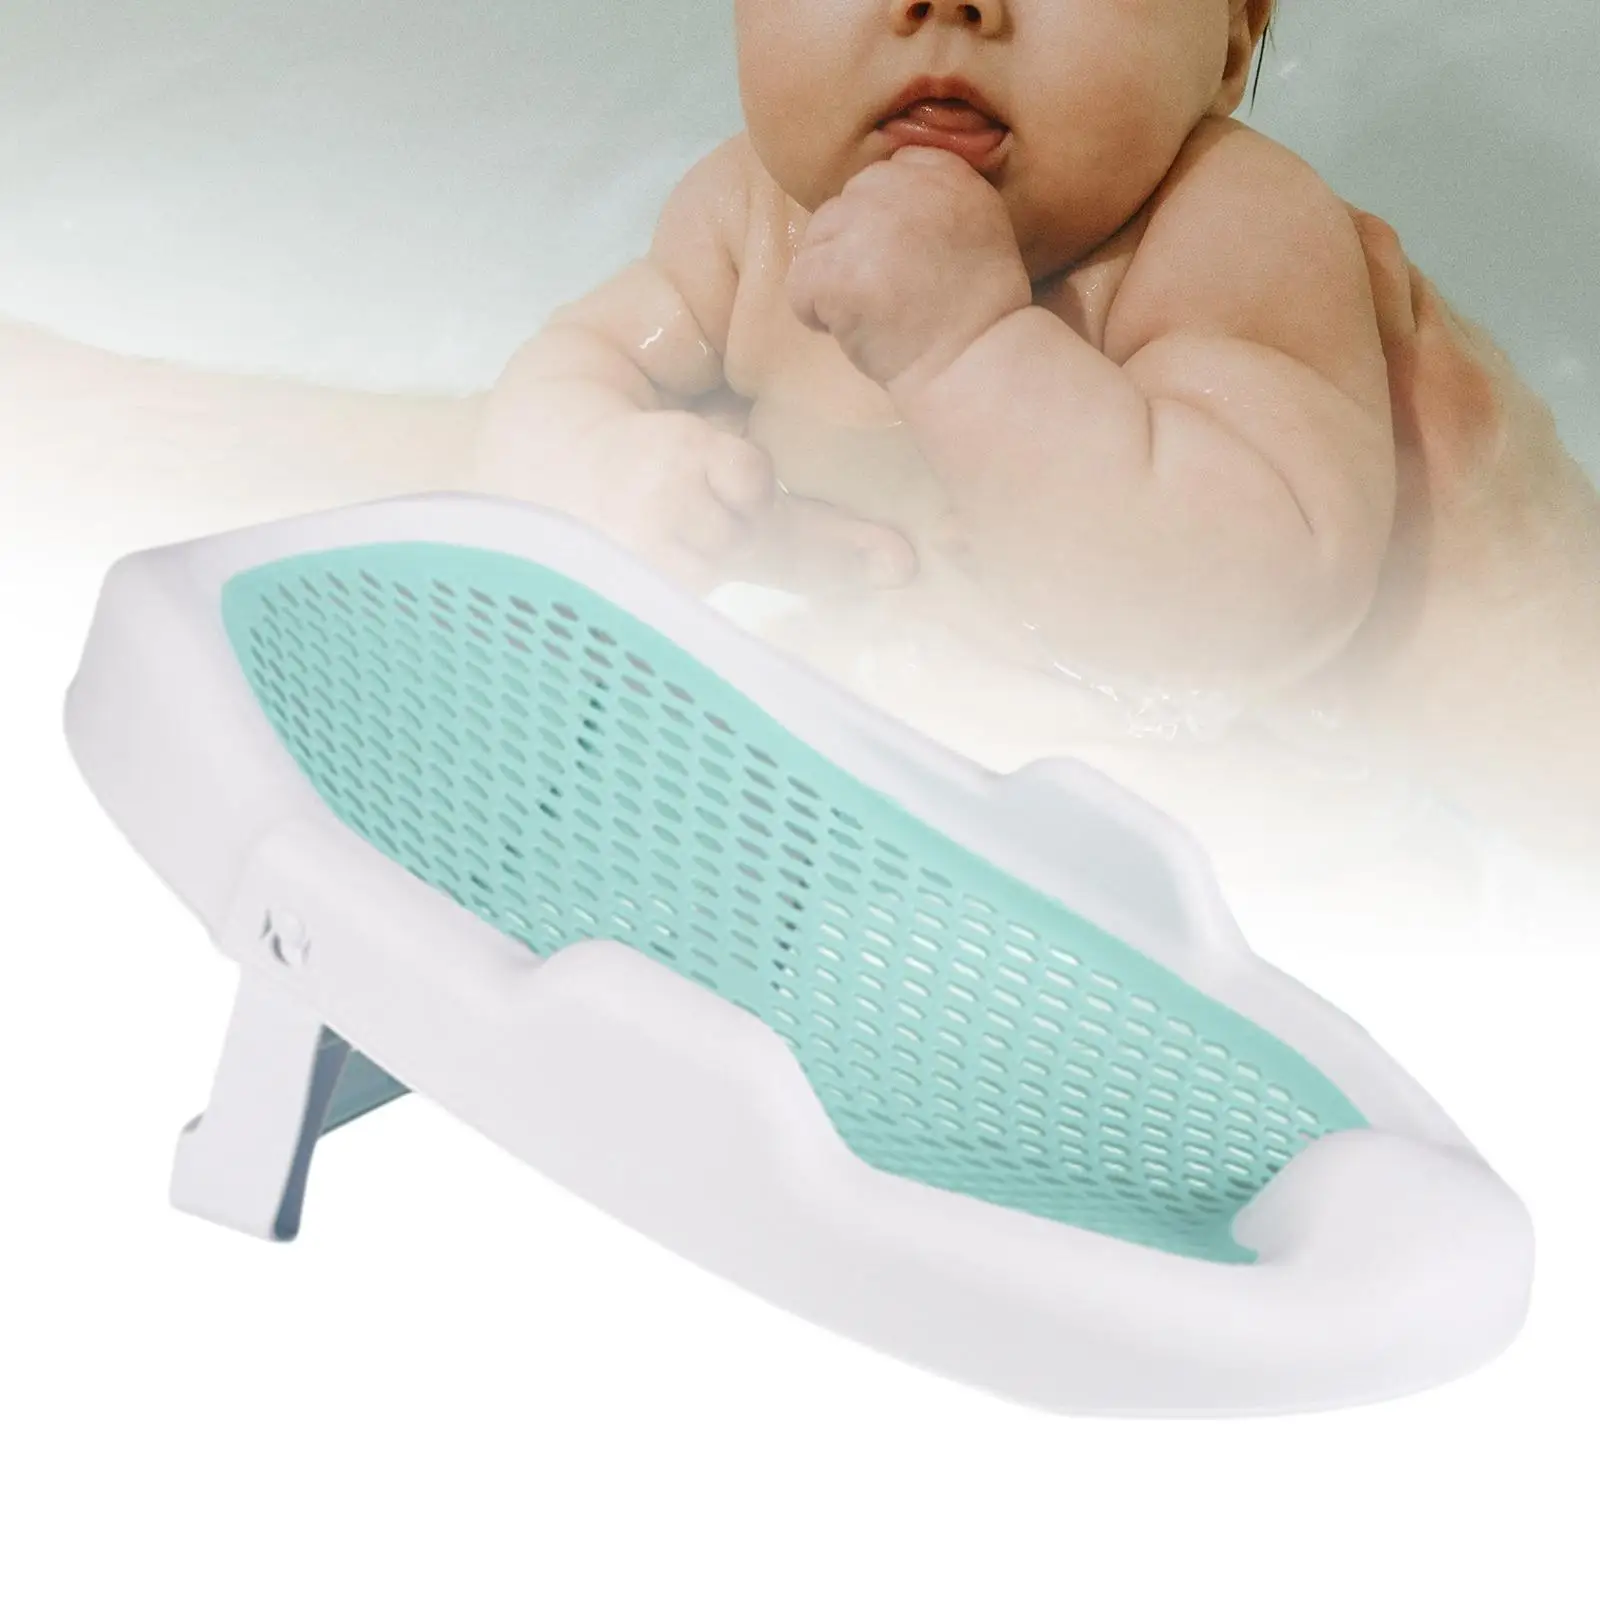 Baby Bath Seat Support Rack Soft TPE Lounger Non Slip Use from Birth until Sitting up Bathtub Shower Rack for 0-2 Years Baby